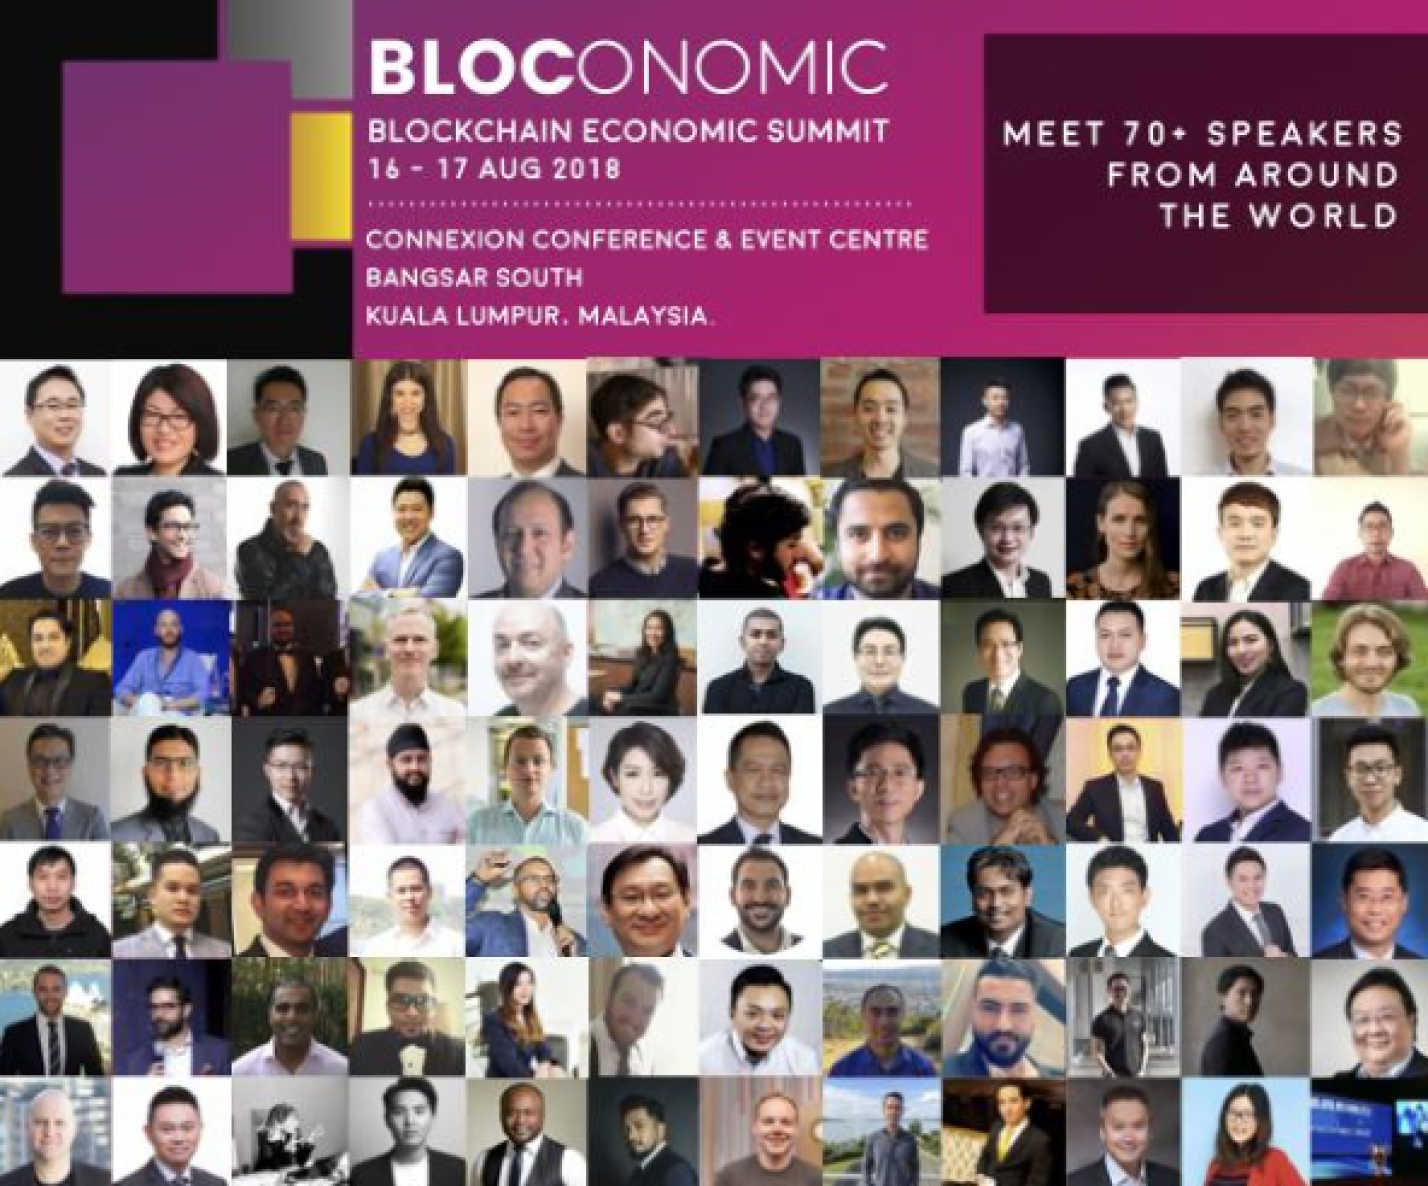 Bloconomic 2018 review – Day 1